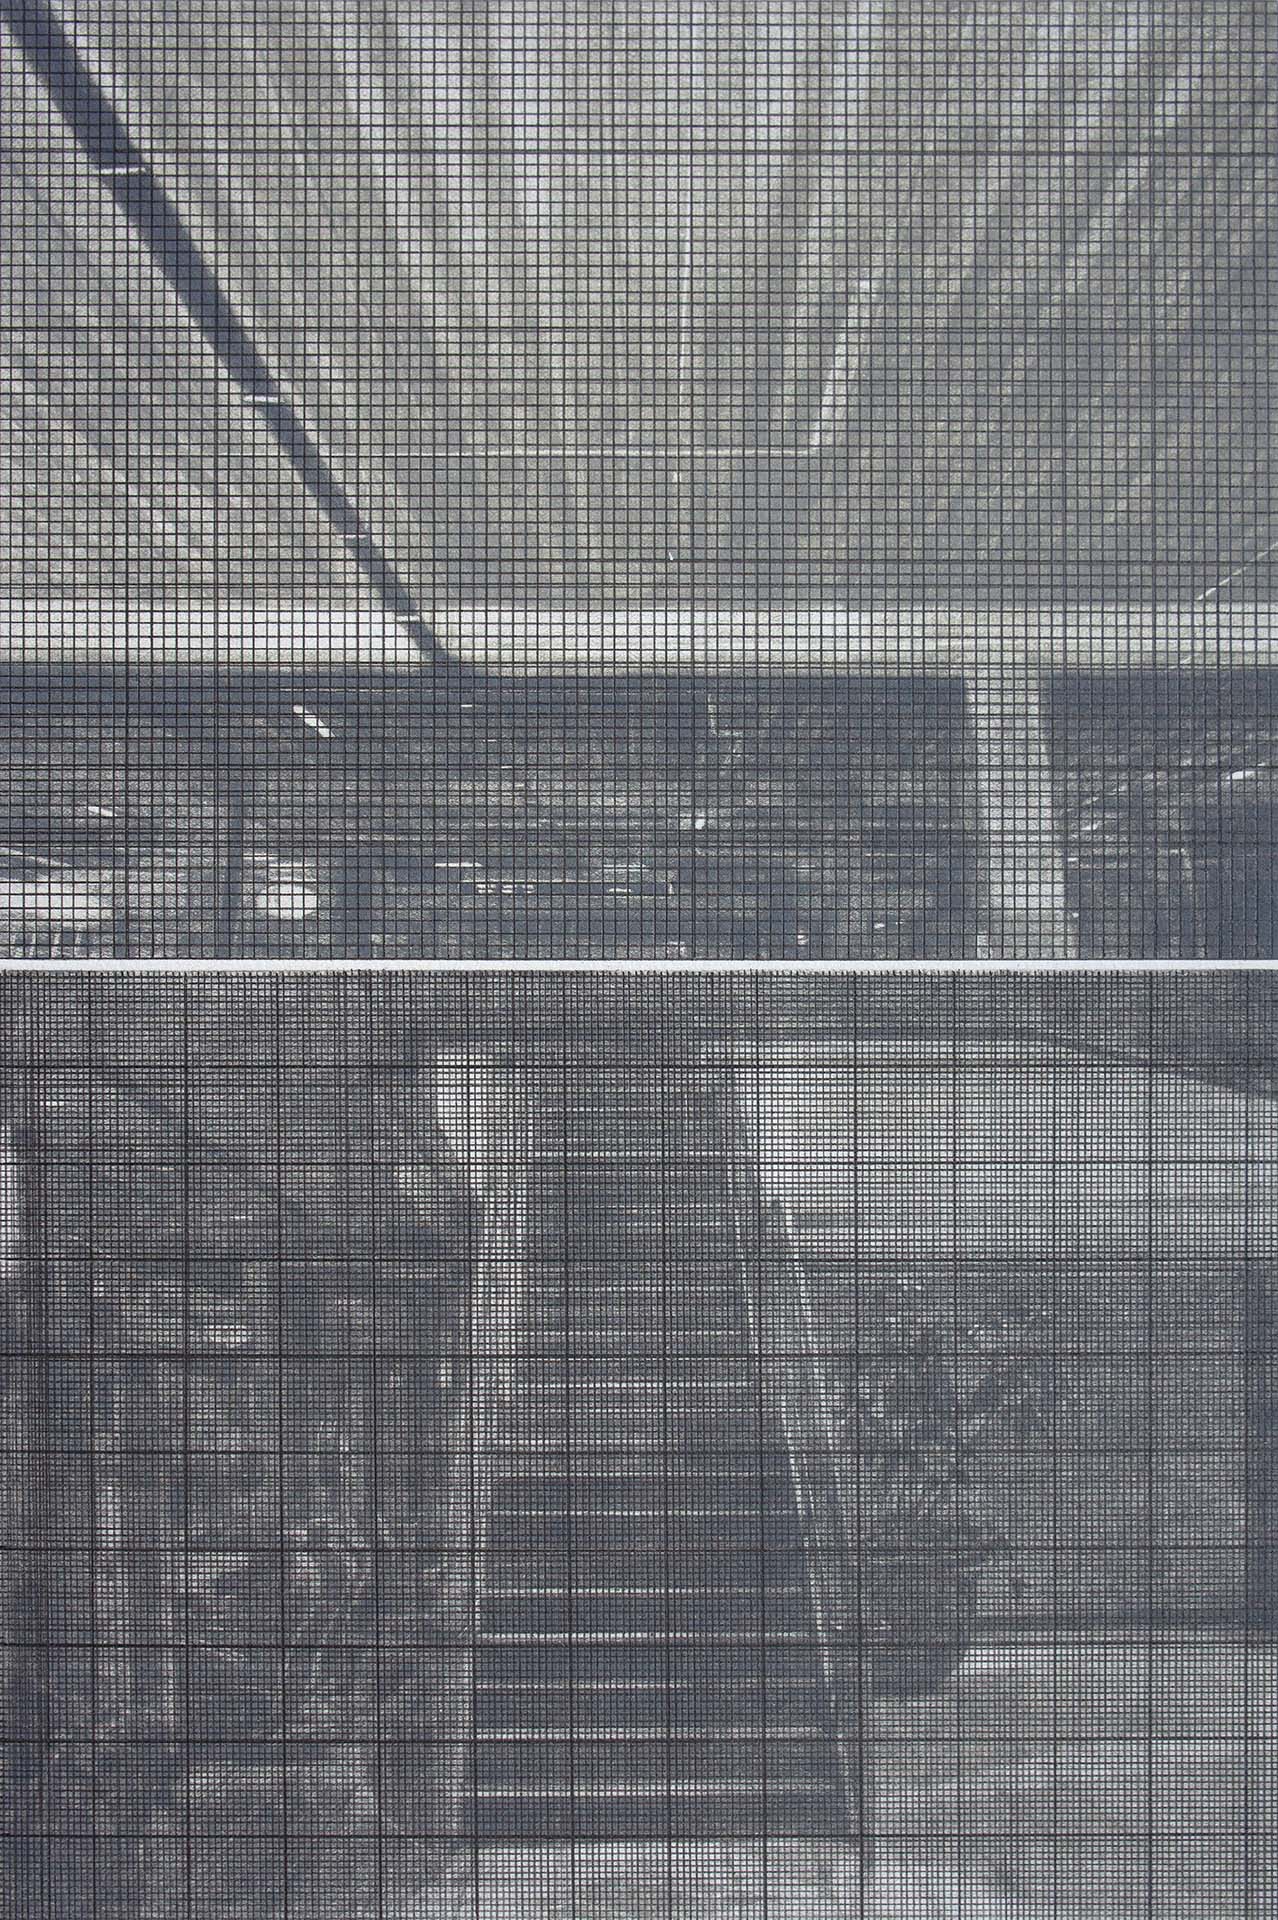  Stairs and Parking Building with Grids 2, 2009, burnished drypoint & graphite, 280 x 190mm 